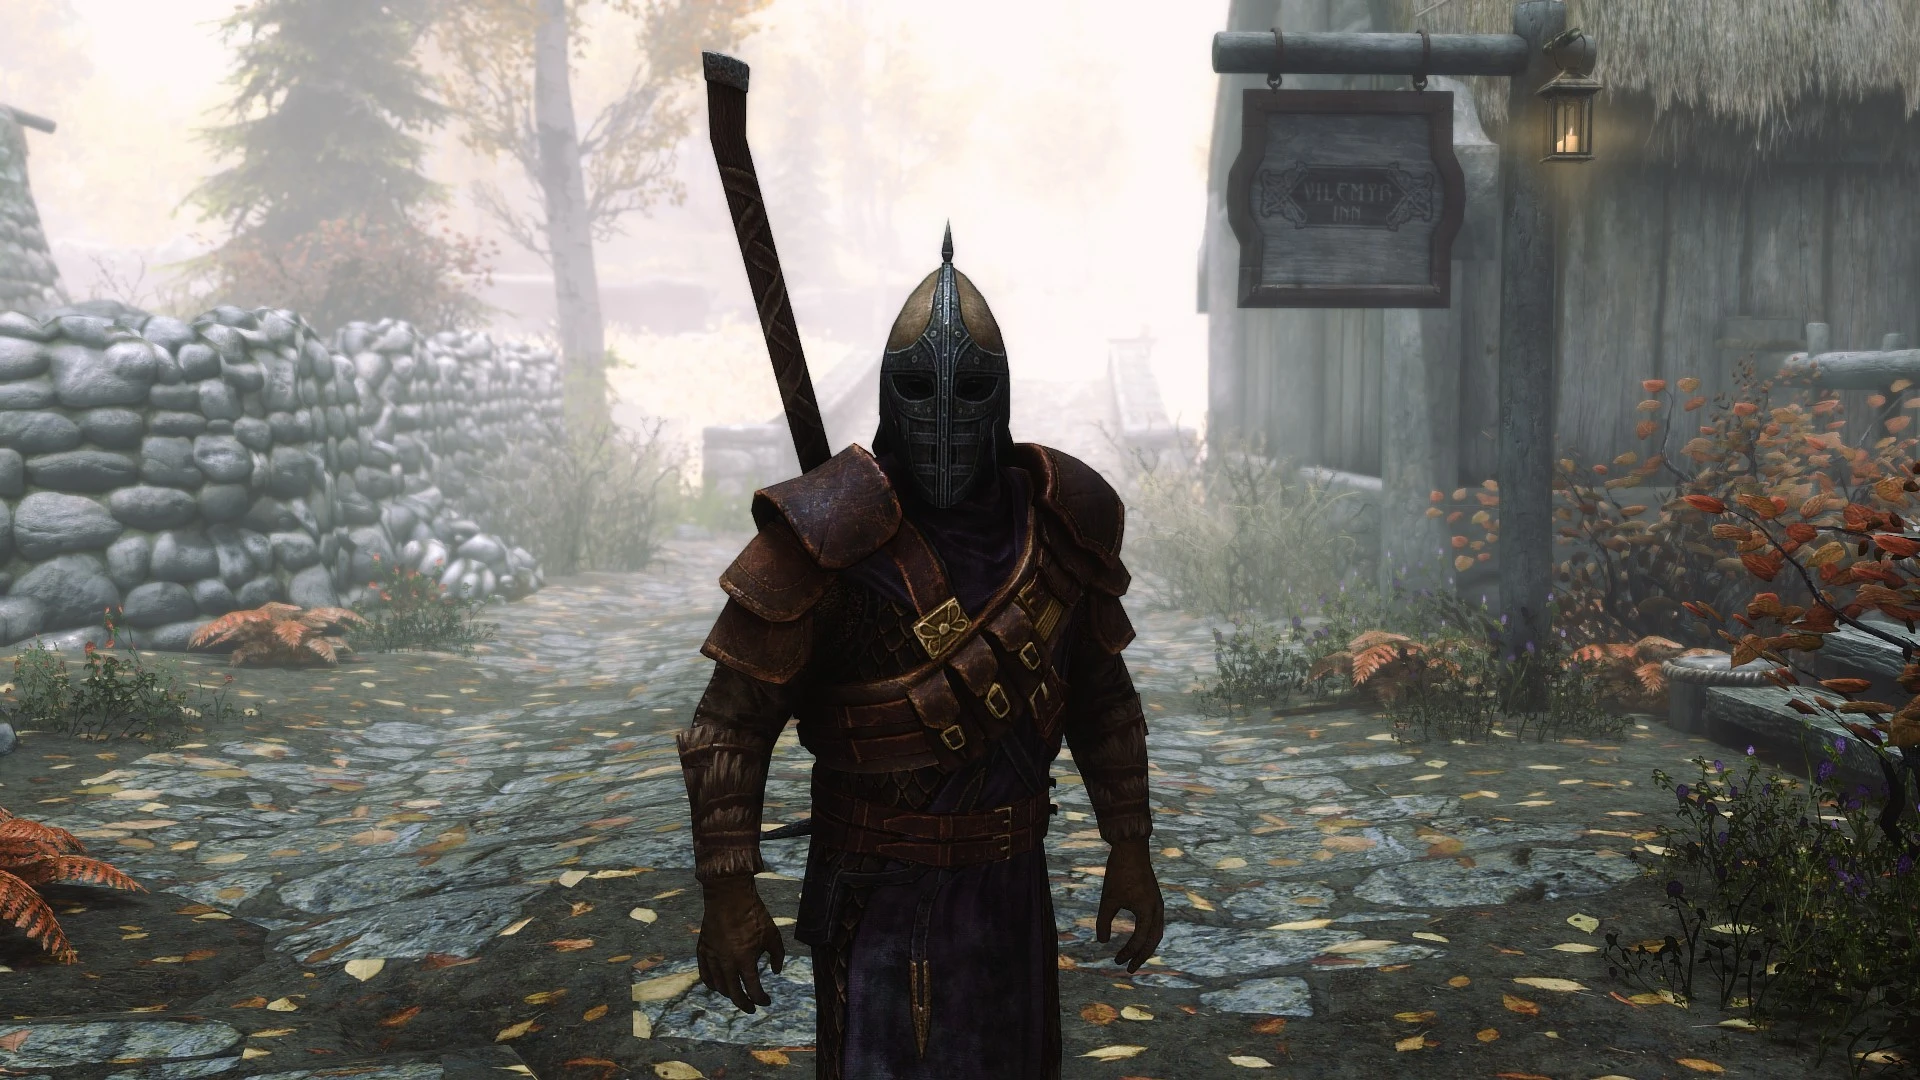 I used to be an adventurer like you - now I am a badass guard at Skyrim ...